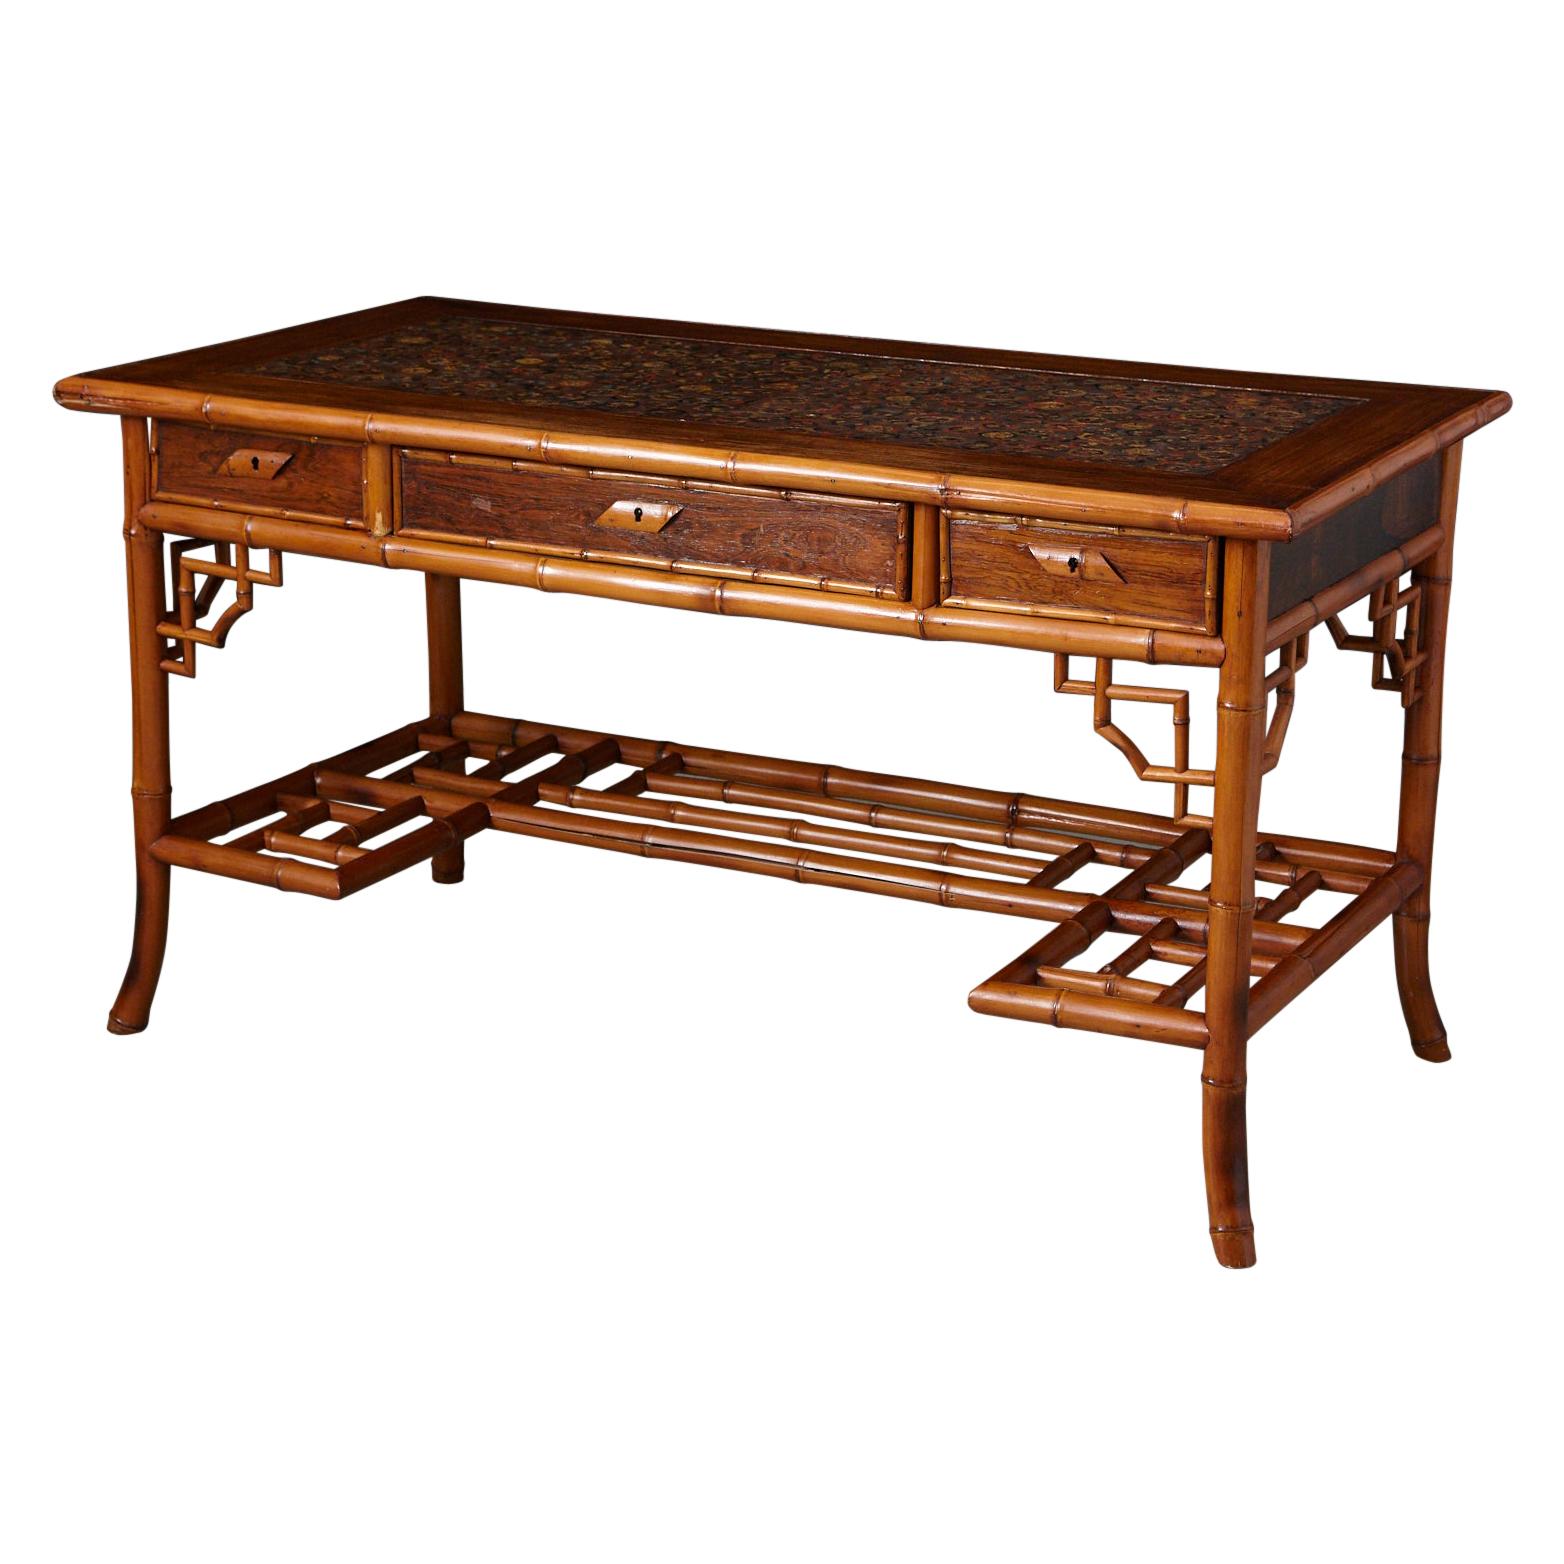 Early 20th Century French Bamboo Desk with Drawers and Leather Top, circa 1920s